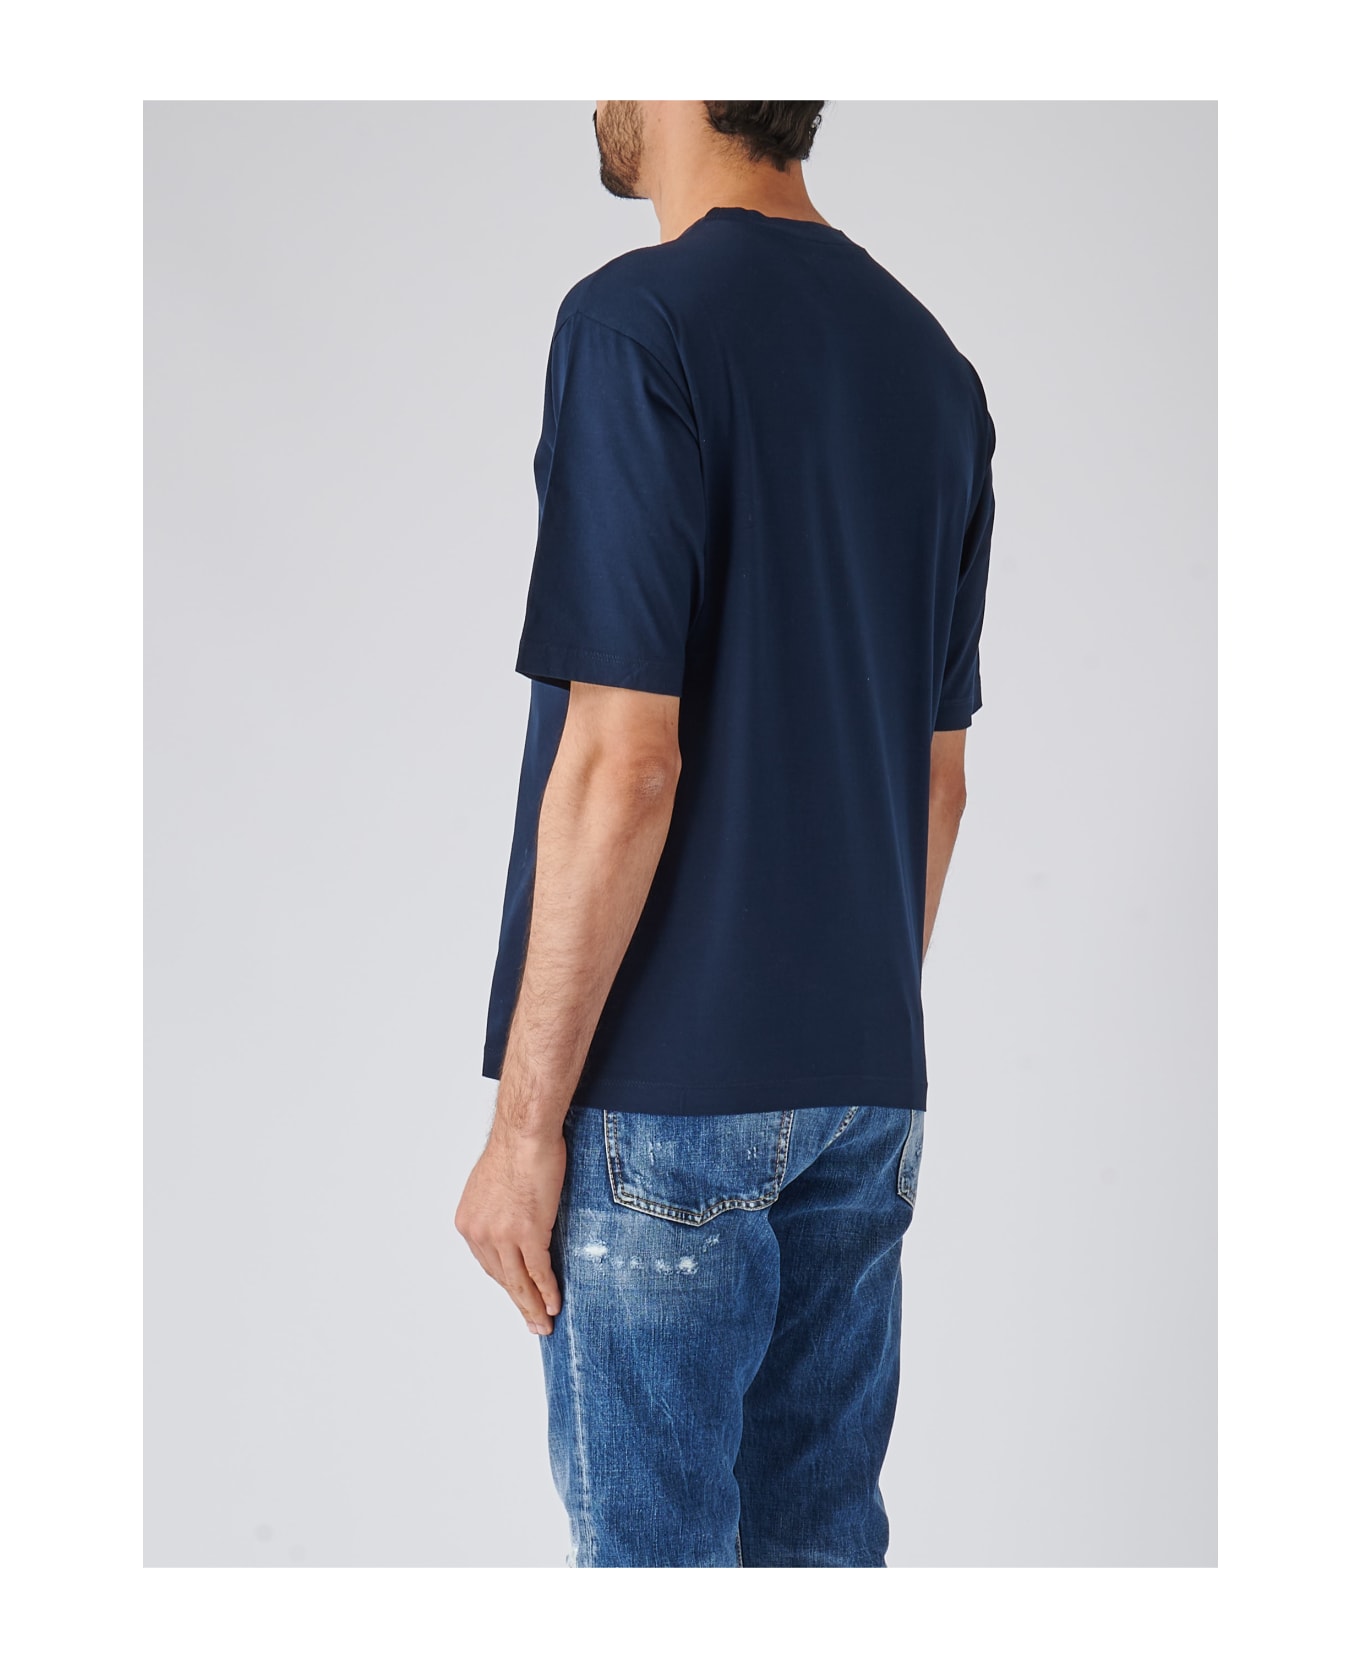 Dsquared2 Loose Fit Tee T-shirt - NAVY